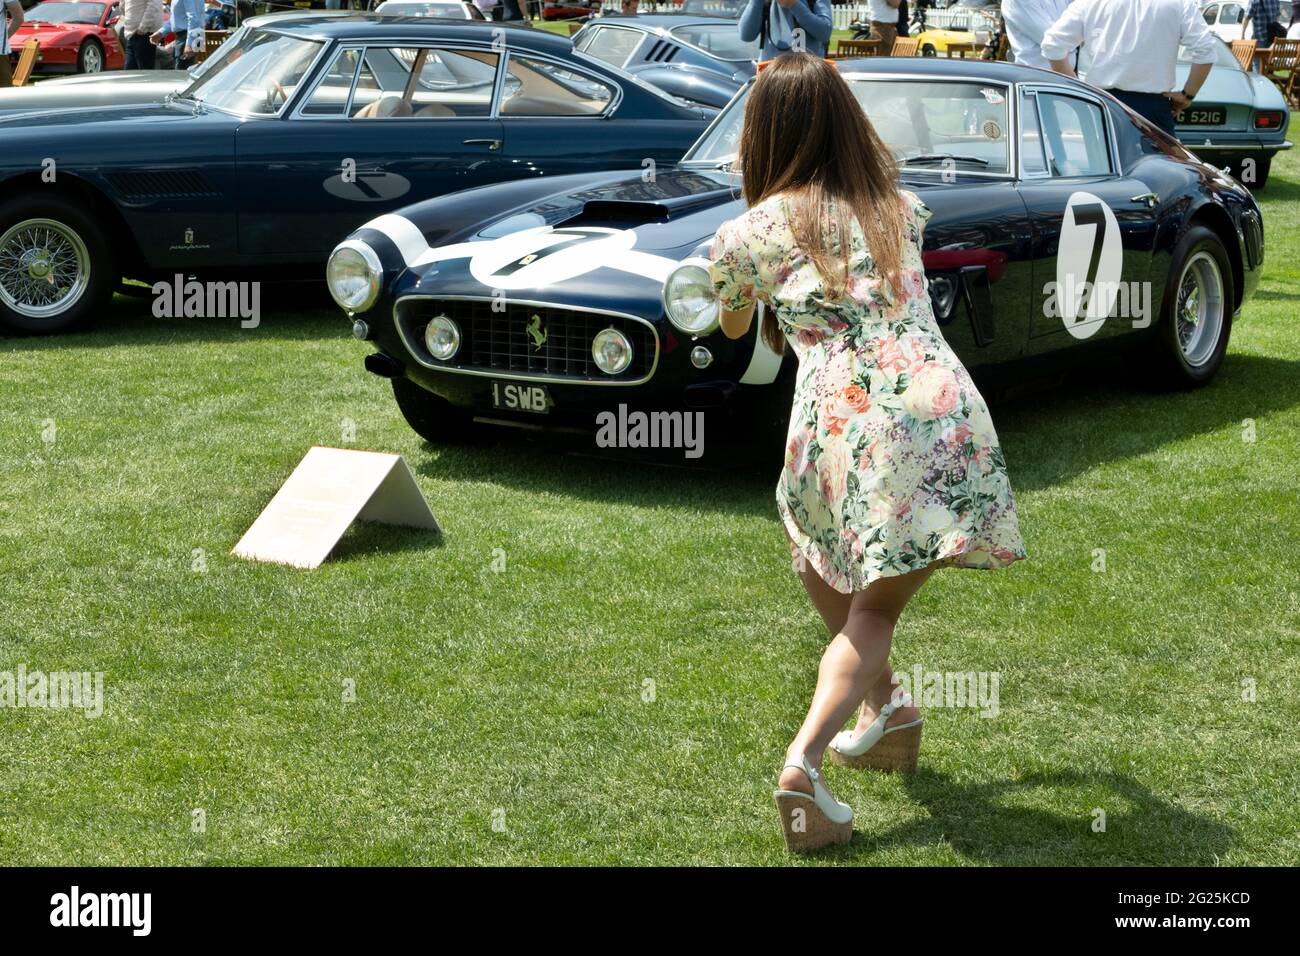 London Concours 2021 at the Honourable Artillery Company City of London UK. 8/6/2021 Stock Photo